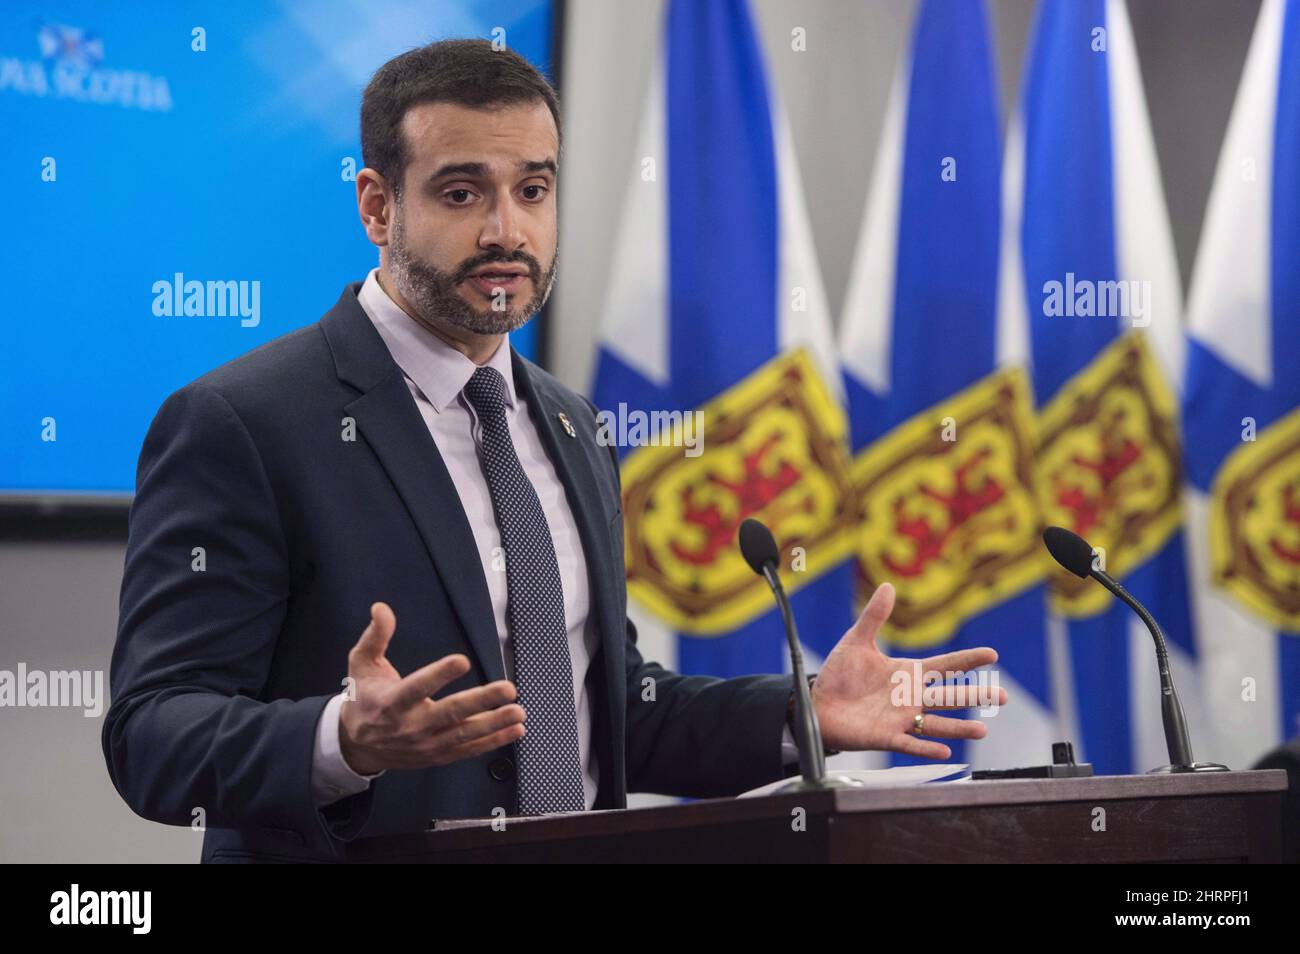 Nova Scotia Education Minister Zach Churchill speaks during a press conference in Halifax on Wednesday, January 24, 2018. A new study says Nova Scotia's early child care sector is being hindered by low pay for workers who feel 'unappreciated and underpaid,' and by the rollout of the province's pre-primary program. THE CANADIAN PRESS/Darren Calabrese Stock Photo